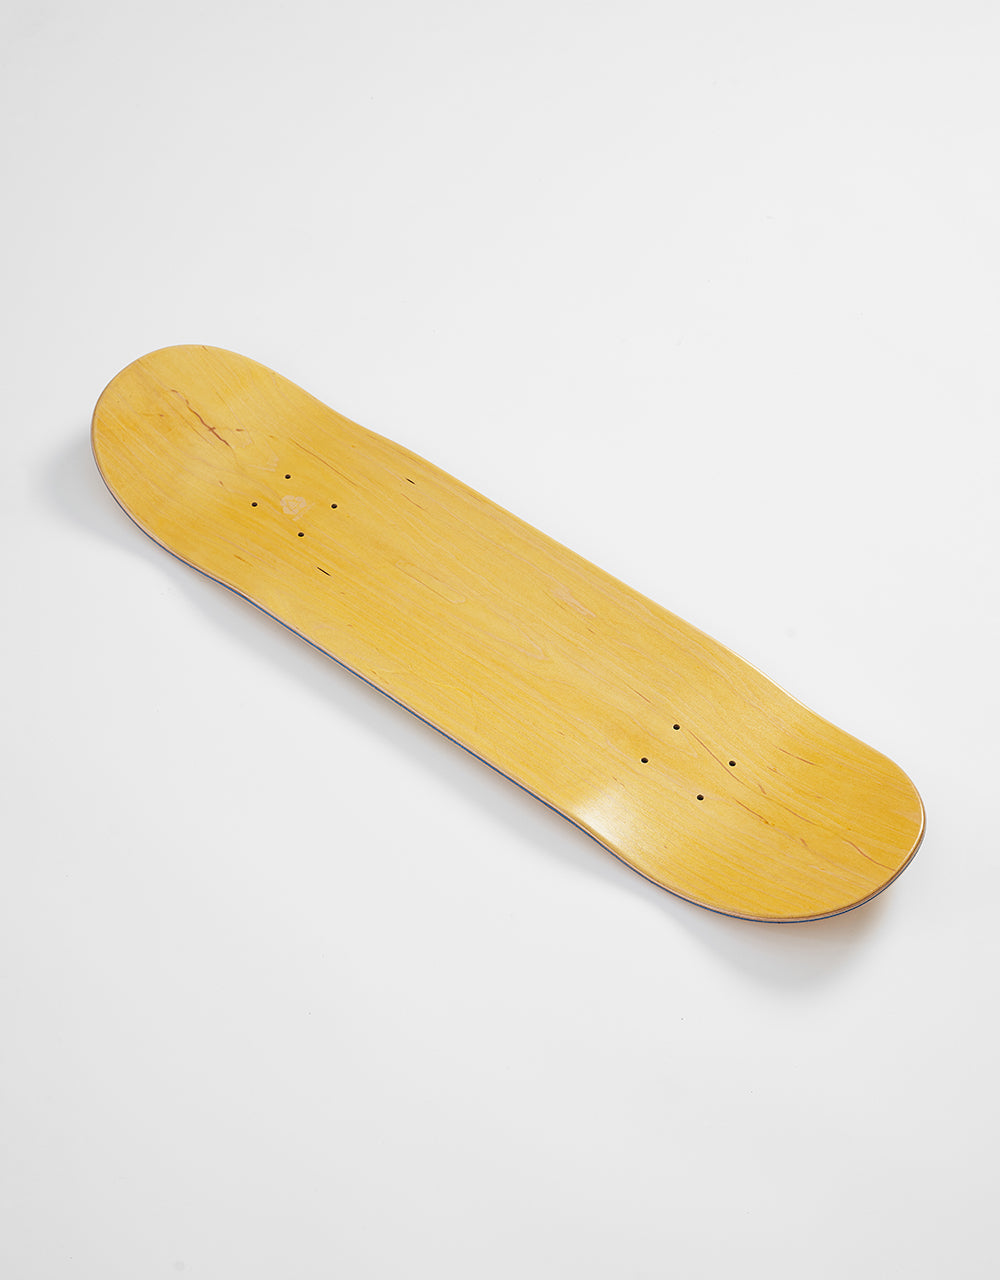 Route One Fruit One Lemon 'Scented' Skateboard Deck - 8.25"